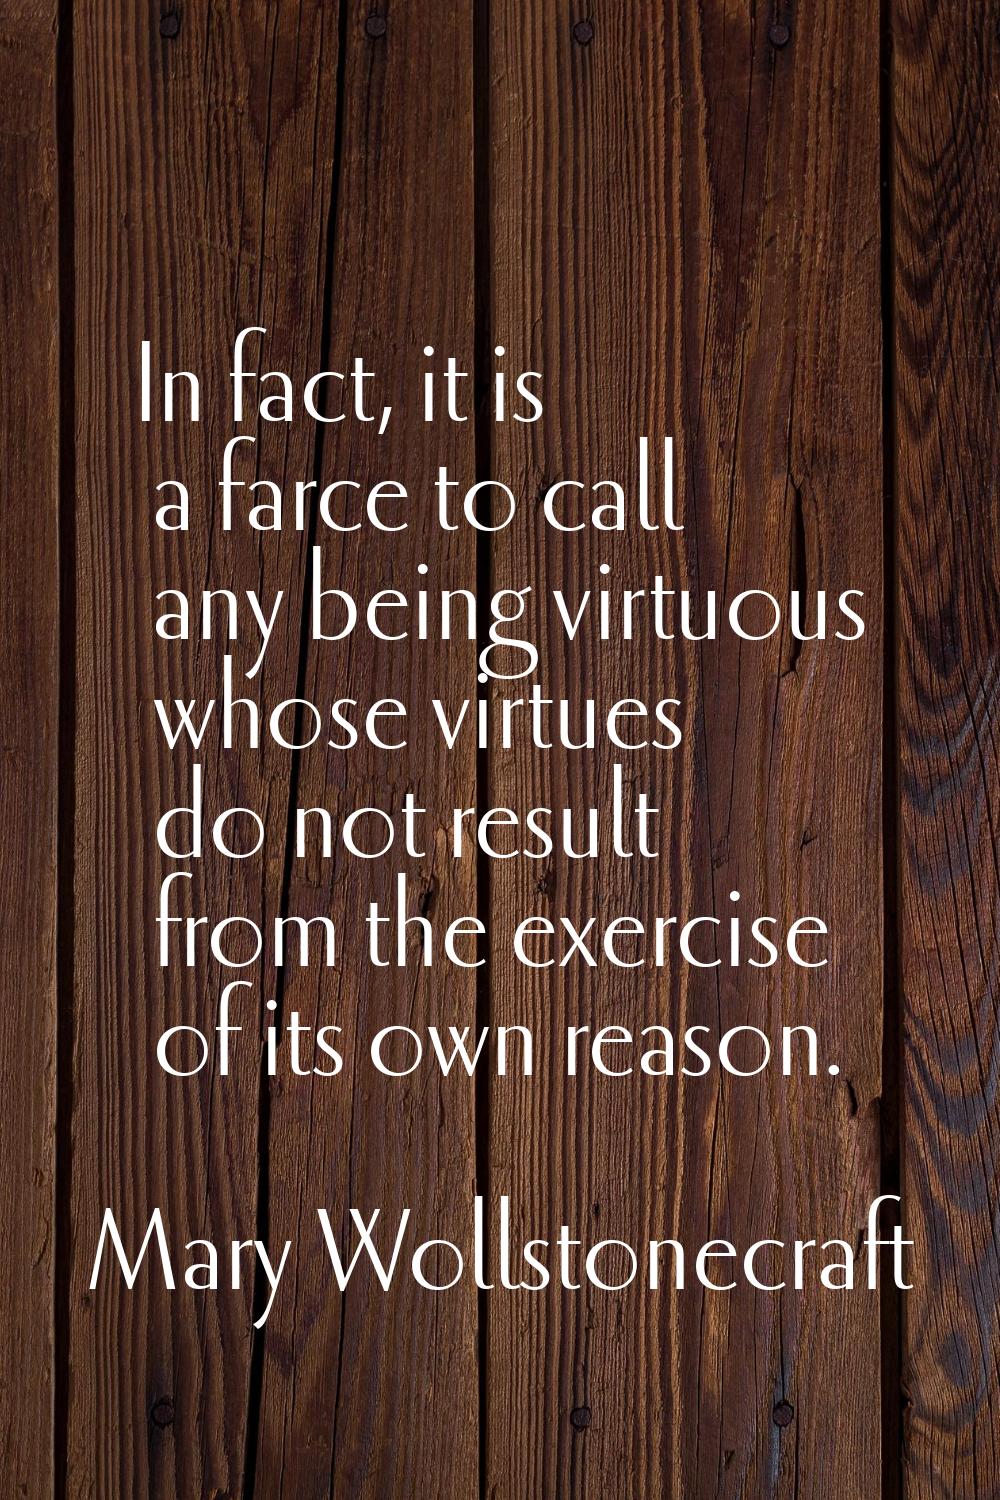 In fact, it is a farce to call any being virtuous whose virtues do not result from the exercise of 